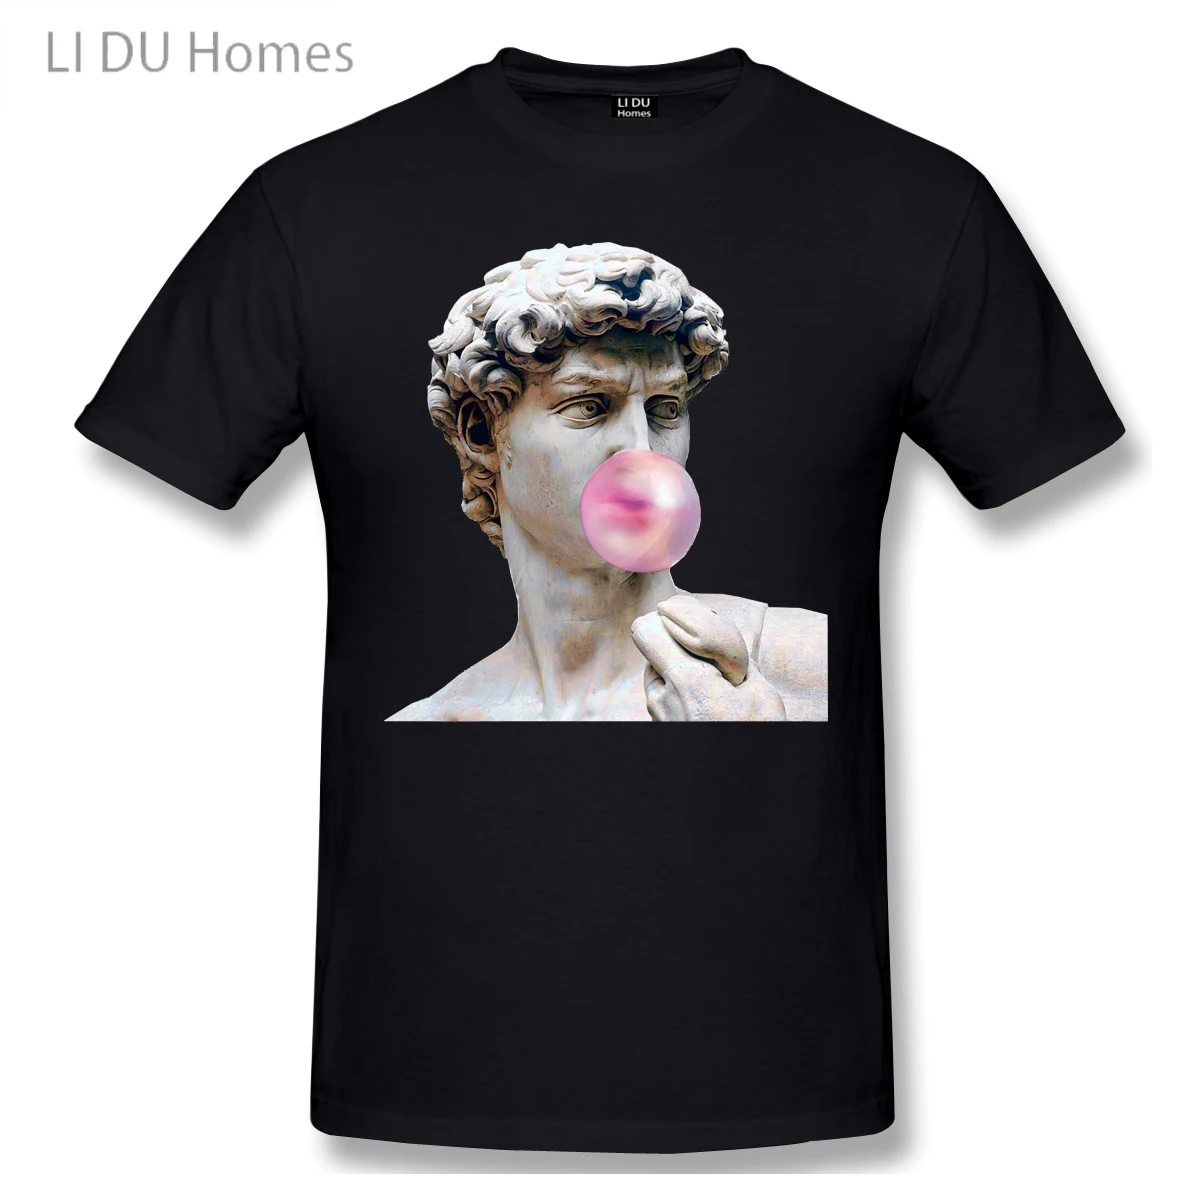 

Marble Sculpture Art, Statue Of David Blowing Pink Gum Funny T Shirts Women Man's T-shirt Cotton Summer Tshirts Graphics Tee Top